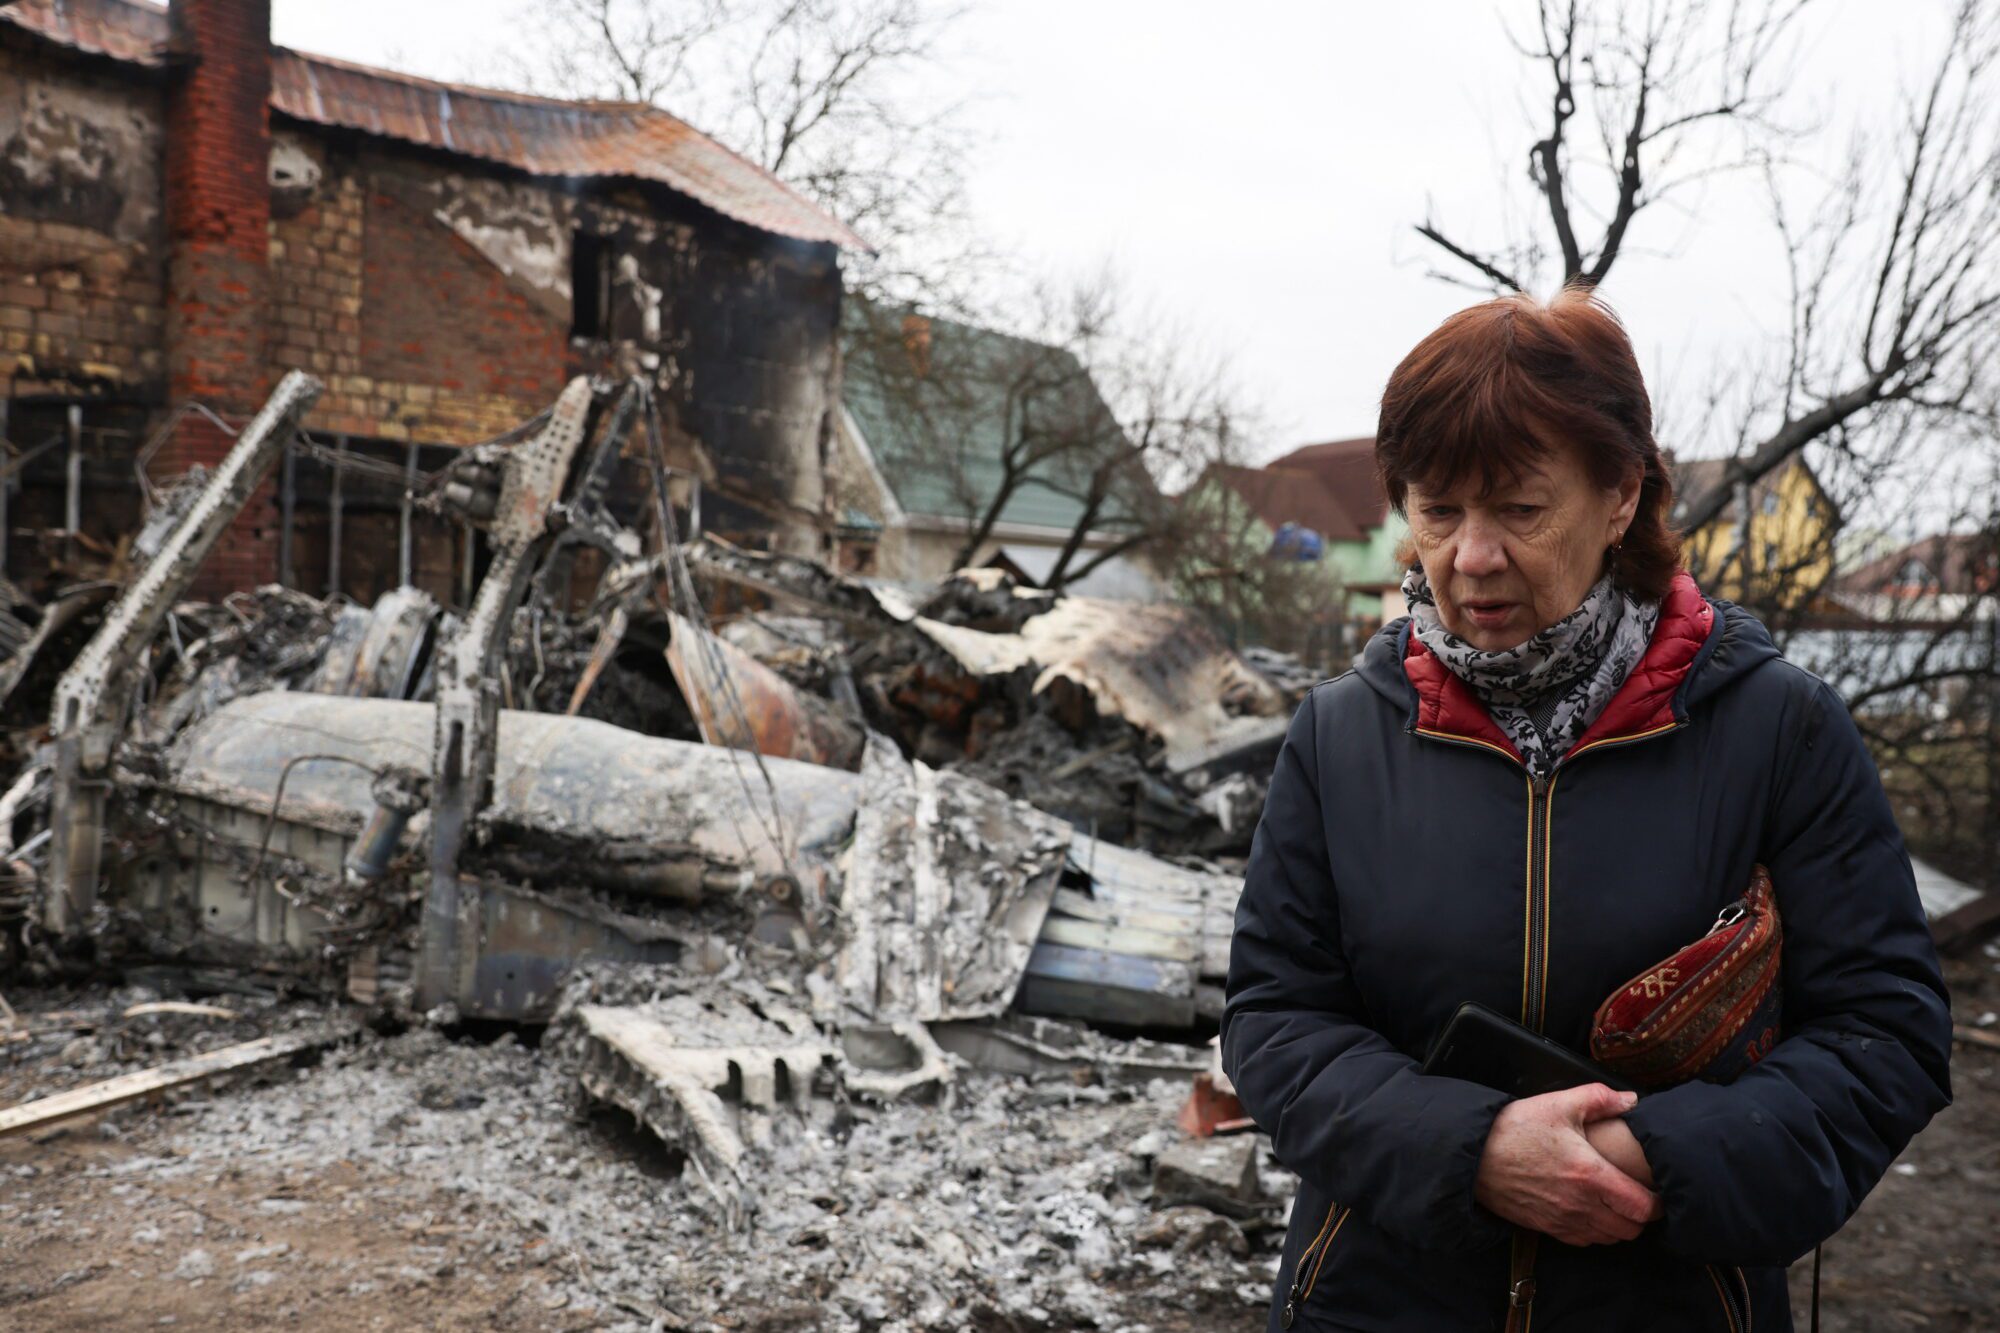 A person walks around the wreckage of an unidentified aircraft that crashed into a house in a residential area, after Russia launched a massive military operation against Ukraine, in Kyiv, Ukraine February 25, 2022. REUTERS/Umit Bektas